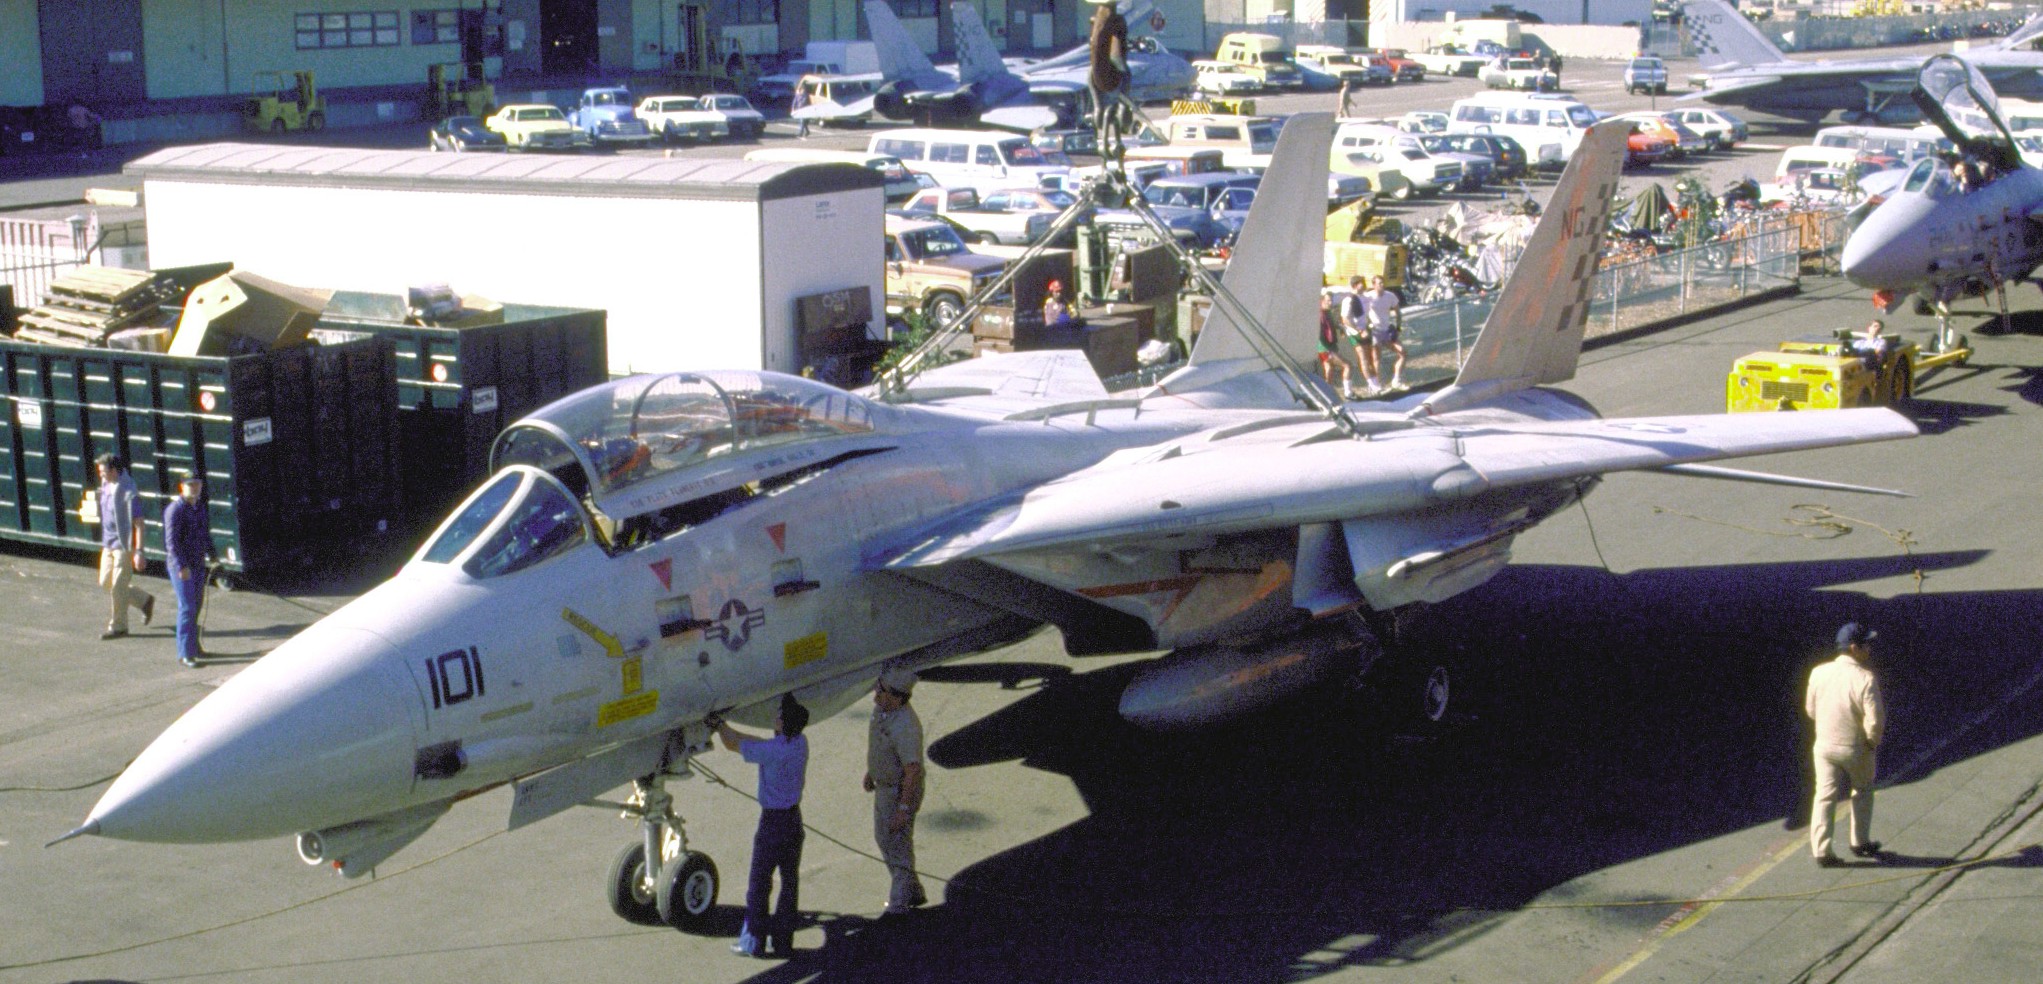 vf-211 fighting checkmates fighter squadron f-14a tomcat us navy carrier air wing cvw-9 uss kitty hawk cv-63 70